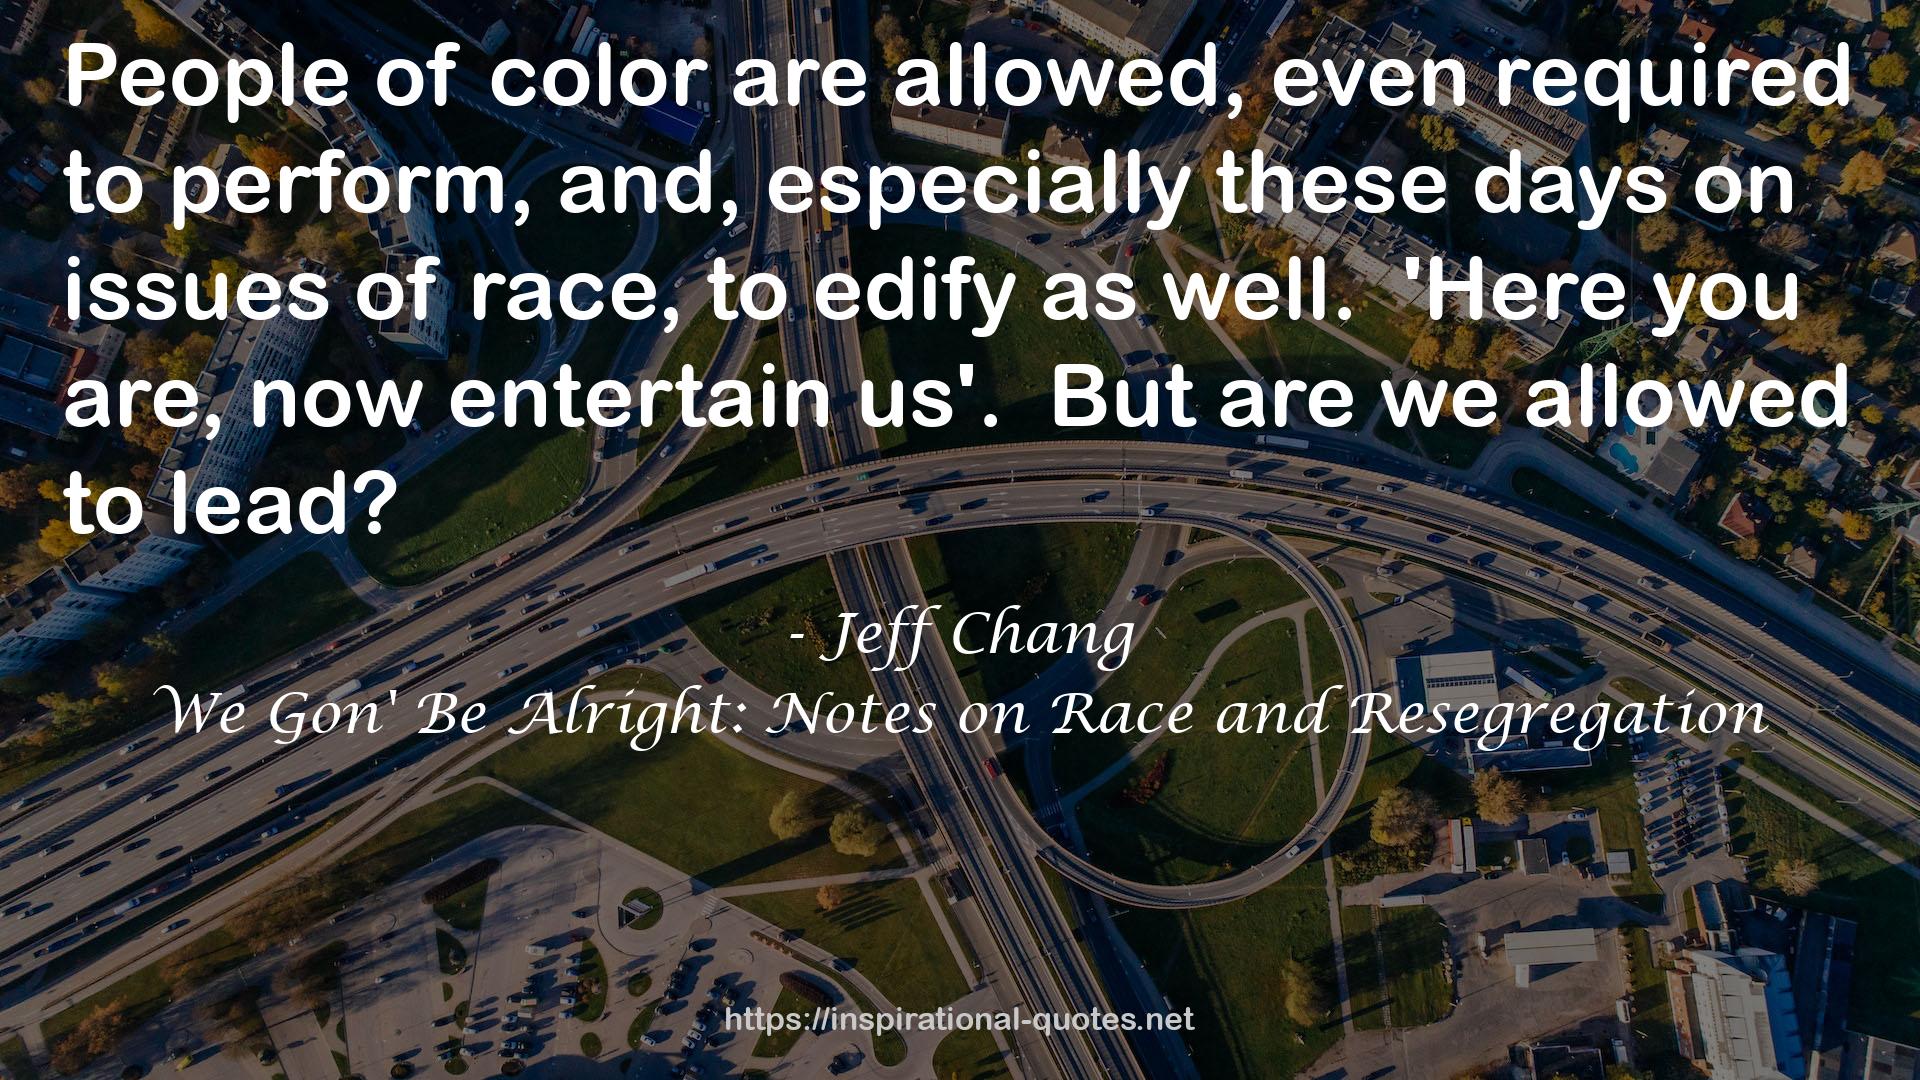 We Gon' Be Alright: Notes on Race and Resegregation QUOTES